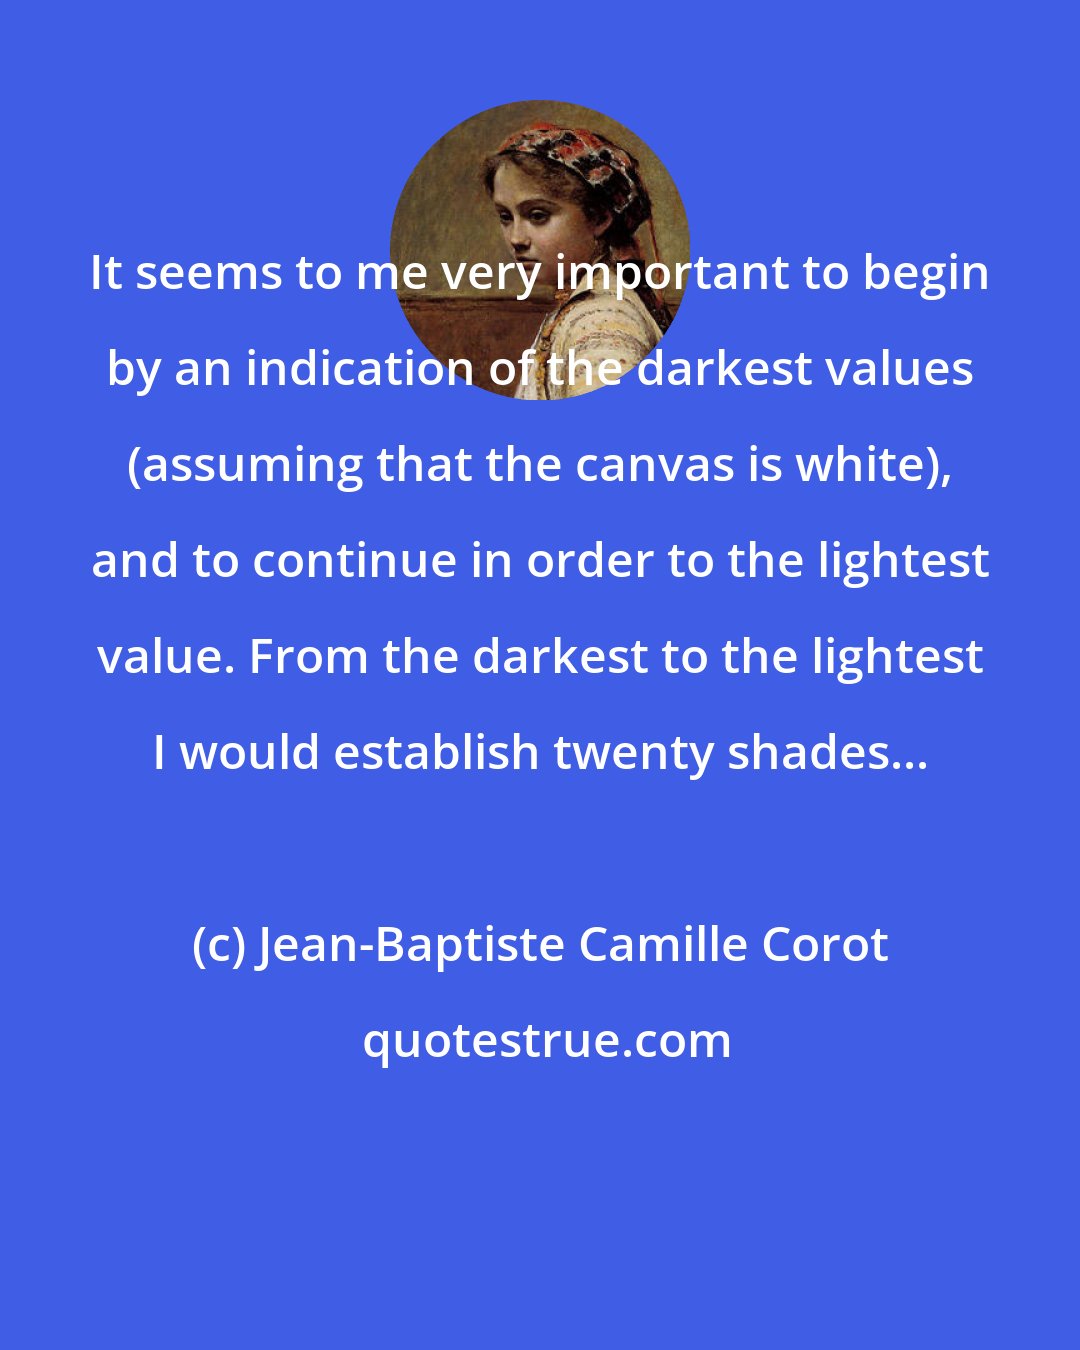 Jean-Baptiste Camille Corot: It seems to me very important to begin by an indication of the darkest values (assuming that the canvas is white), and to continue in order to the lightest value. From the darkest to the lightest I would establish twenty shades...